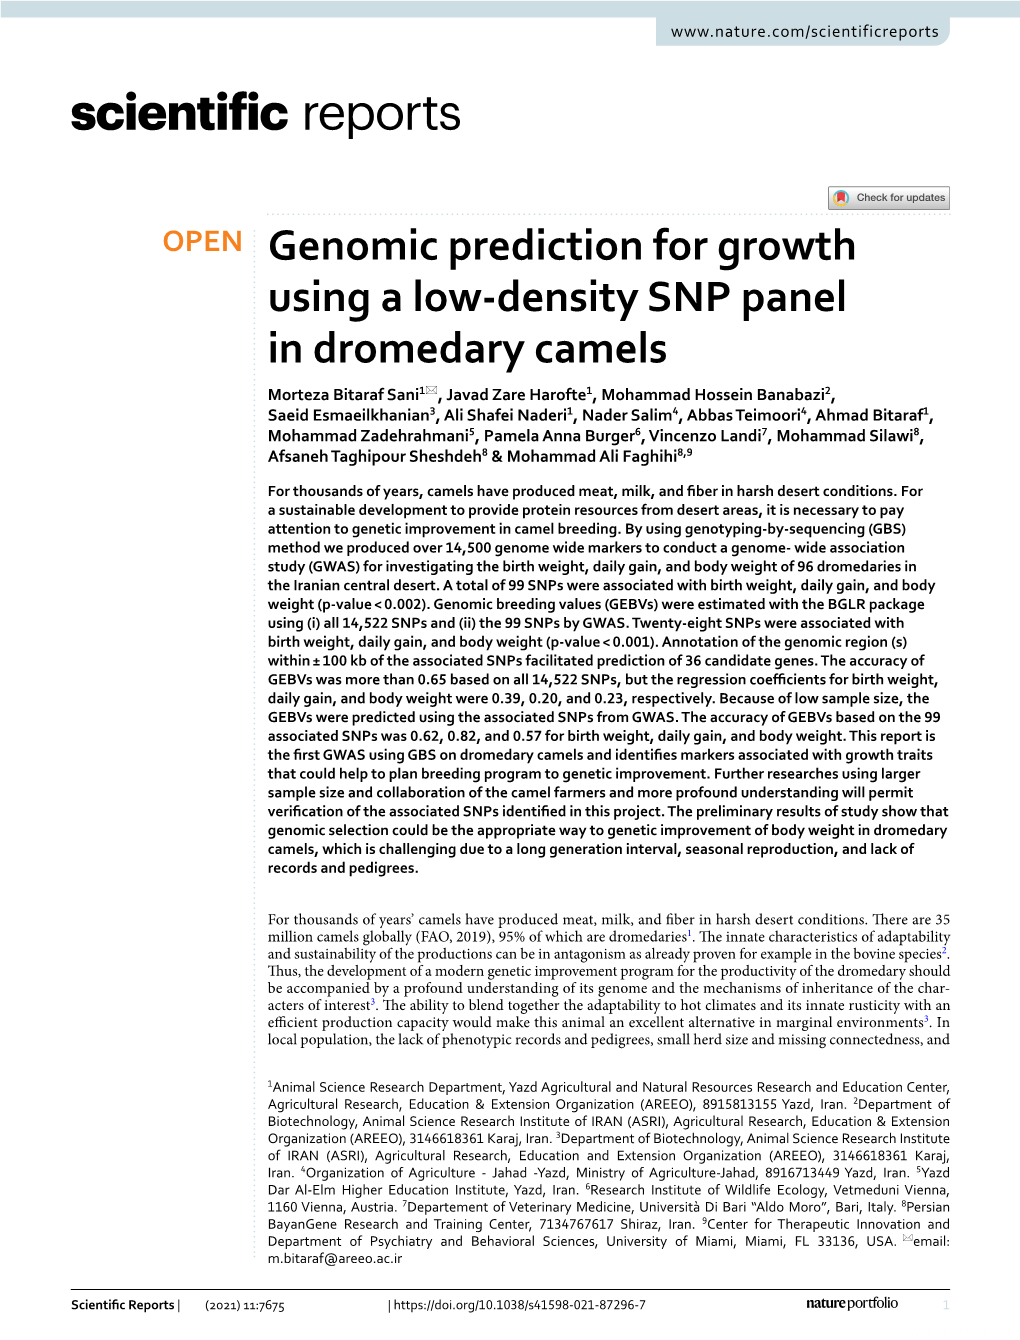 Genomic Prediction for Growth Using a Low-Density SNP Panel in Dromedary Camels